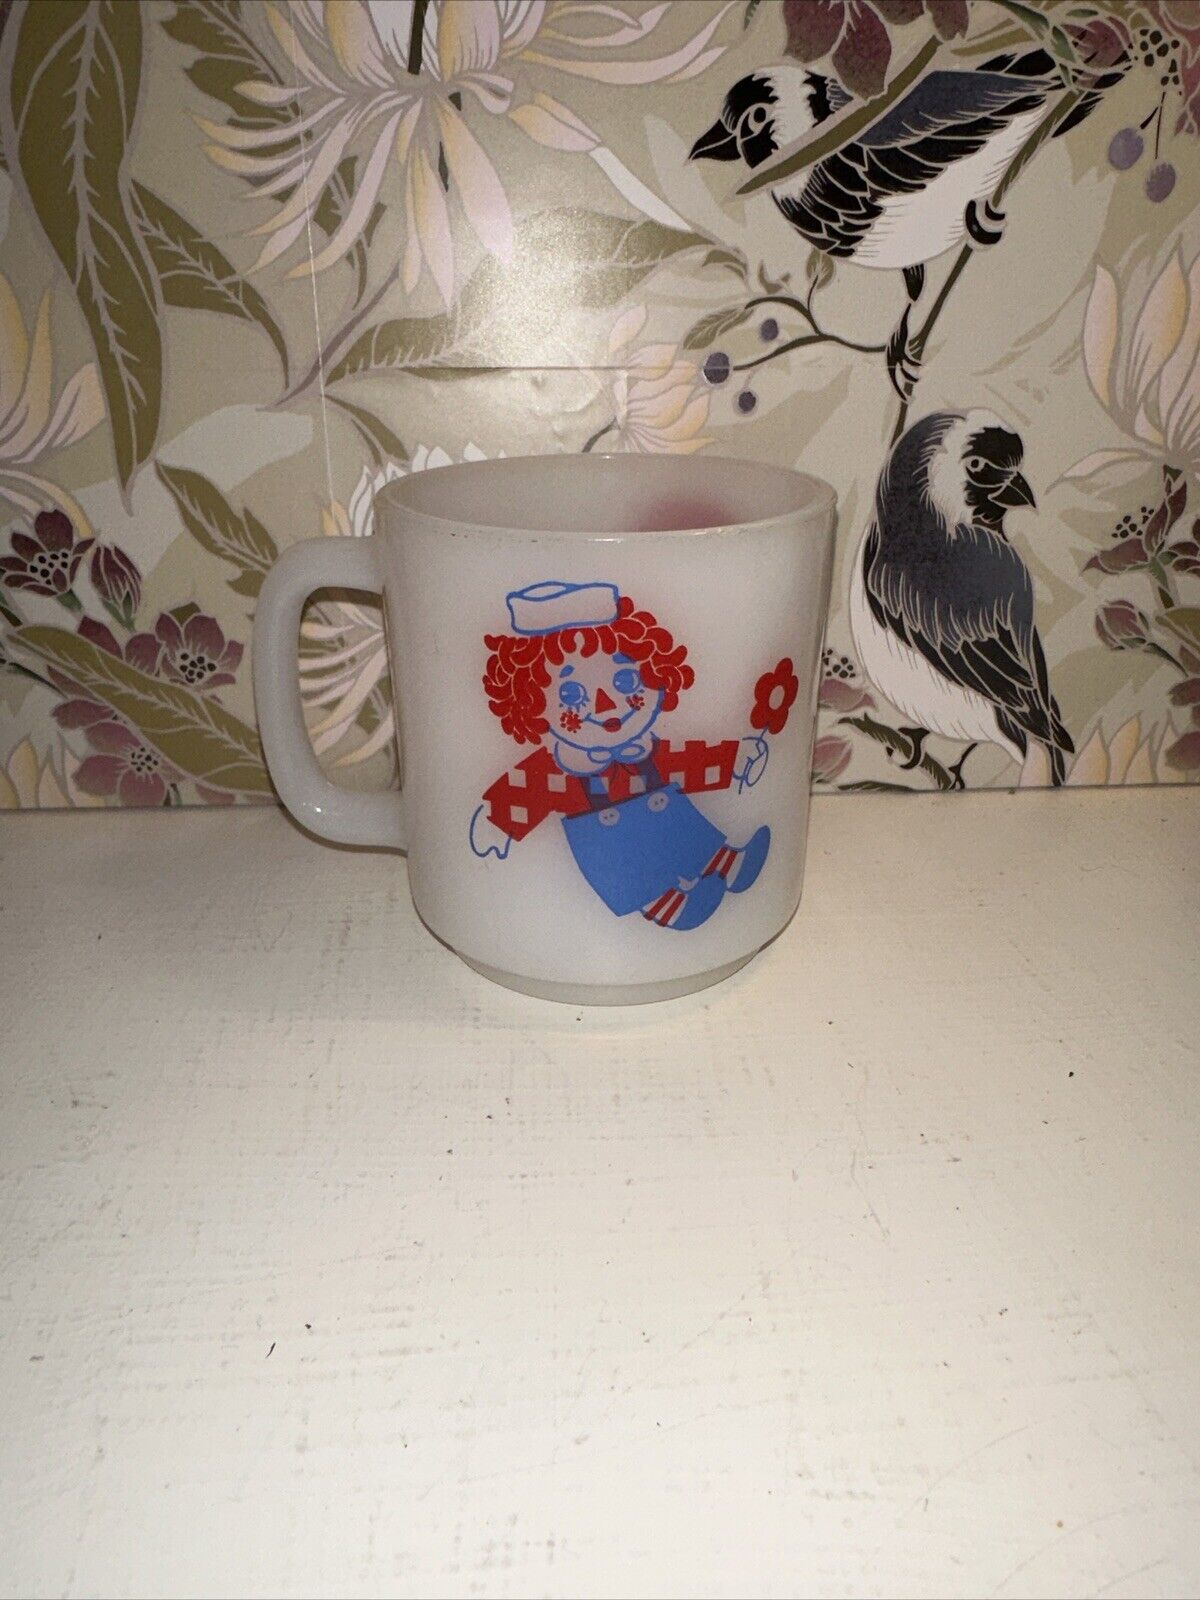 Vintage Raggedy Ann and Andy Milk Glass Coffee Cup Mug By Glasbake